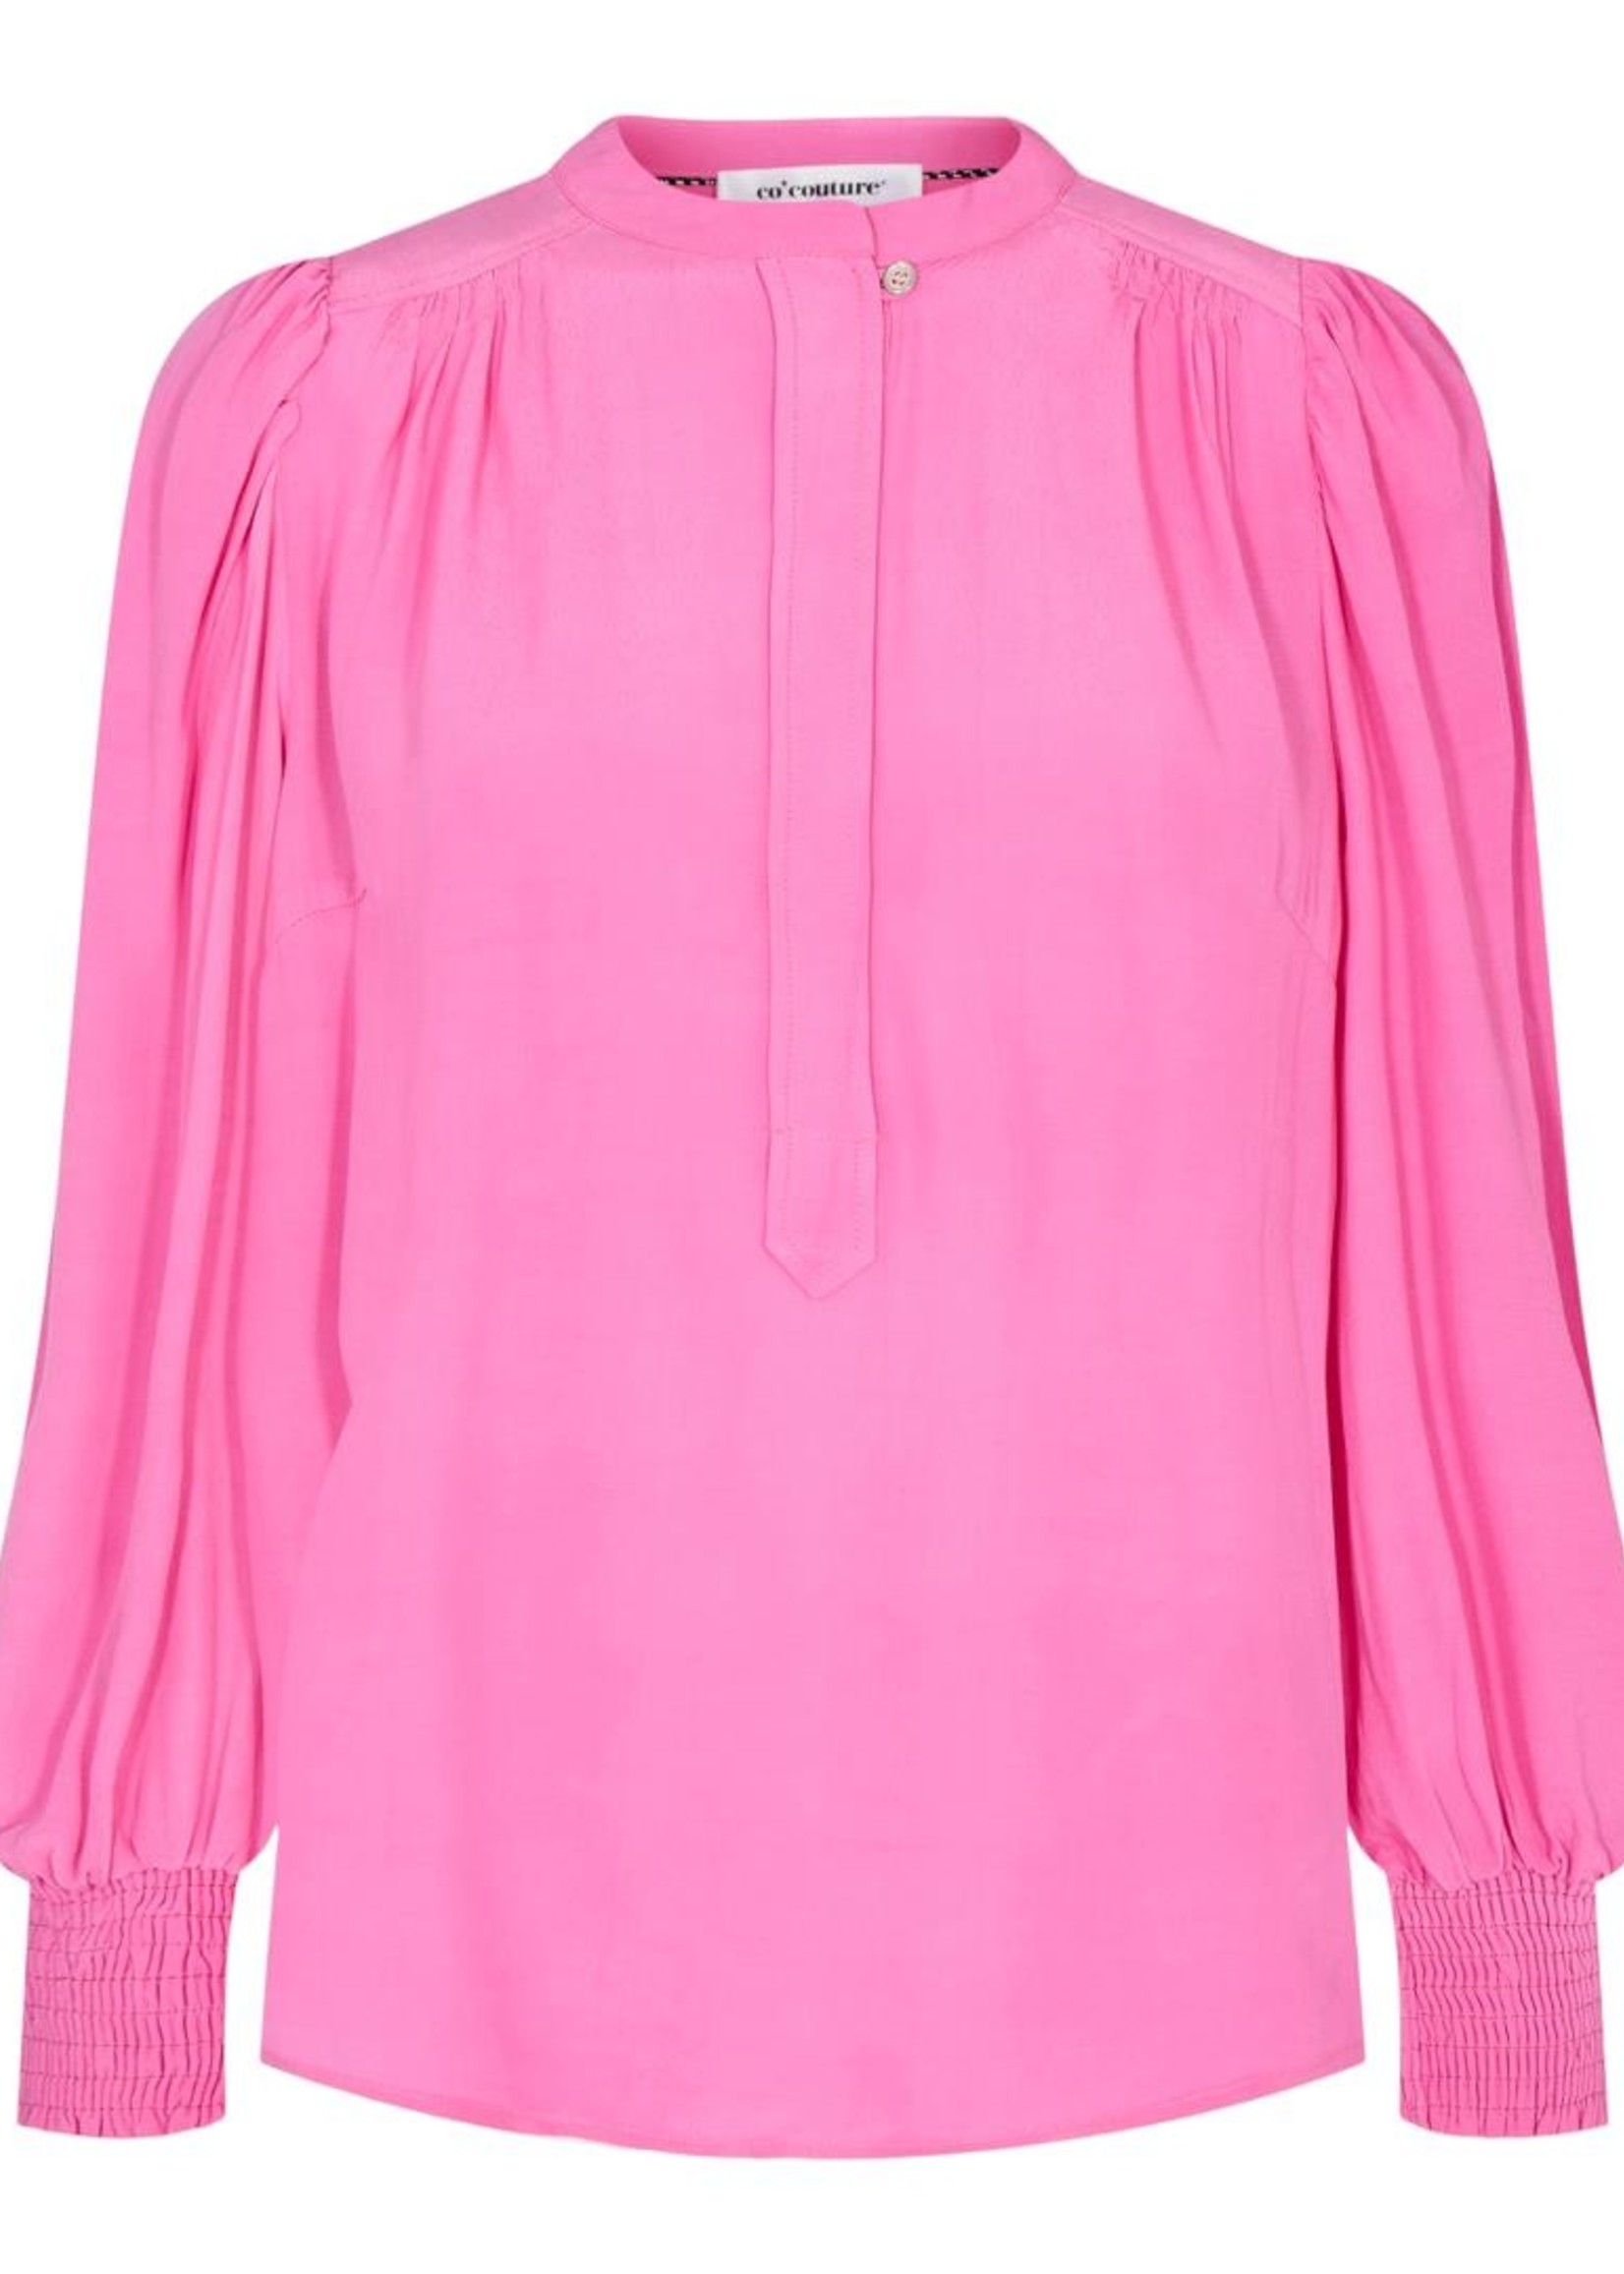 AMICA kids】COUTURE BLOUSE PINK | finiscapital.com